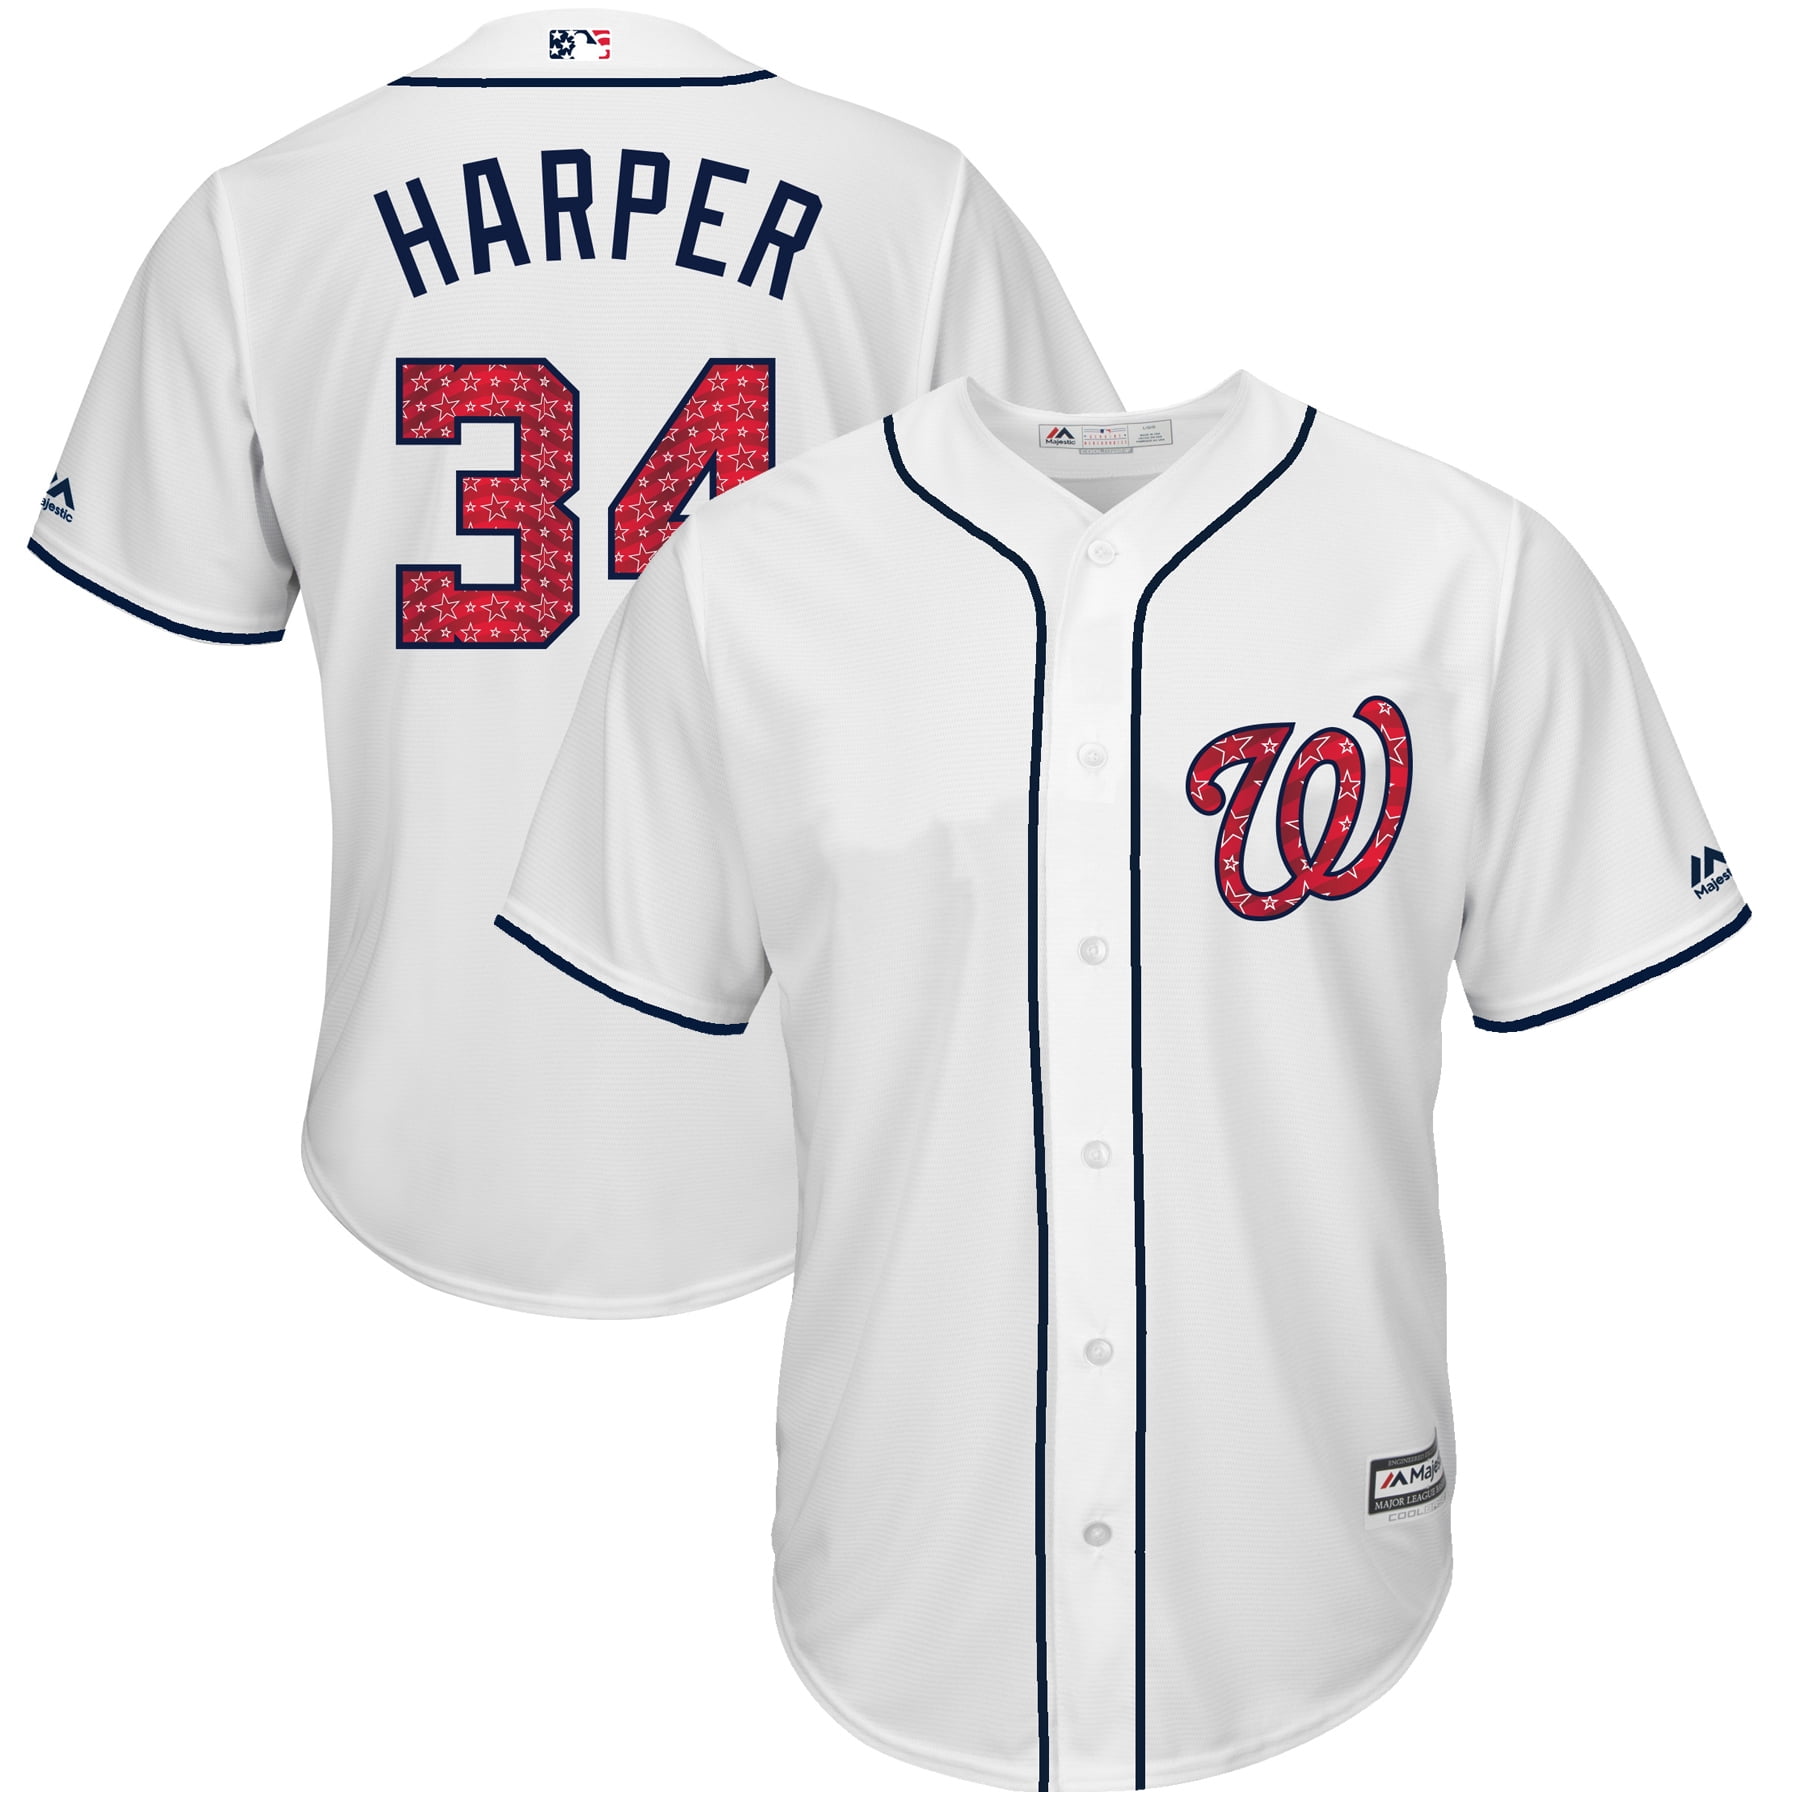 nationals stars and stripes jersey